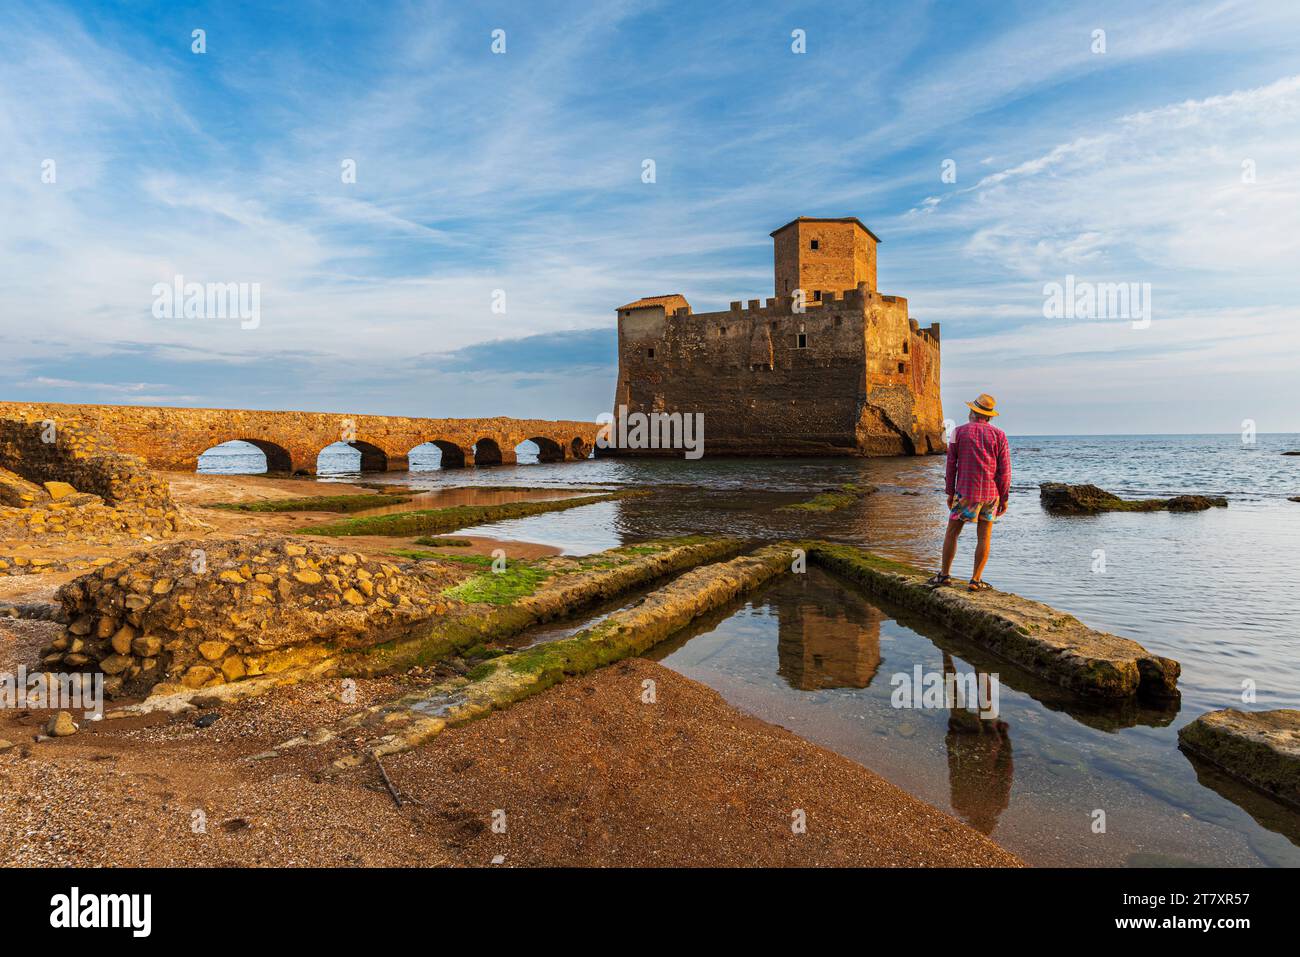 Man with hat stands on top of Roman ruin facing the medieval castle of Torre Astura rising from the sea, Nettuno municipality Stock Photo